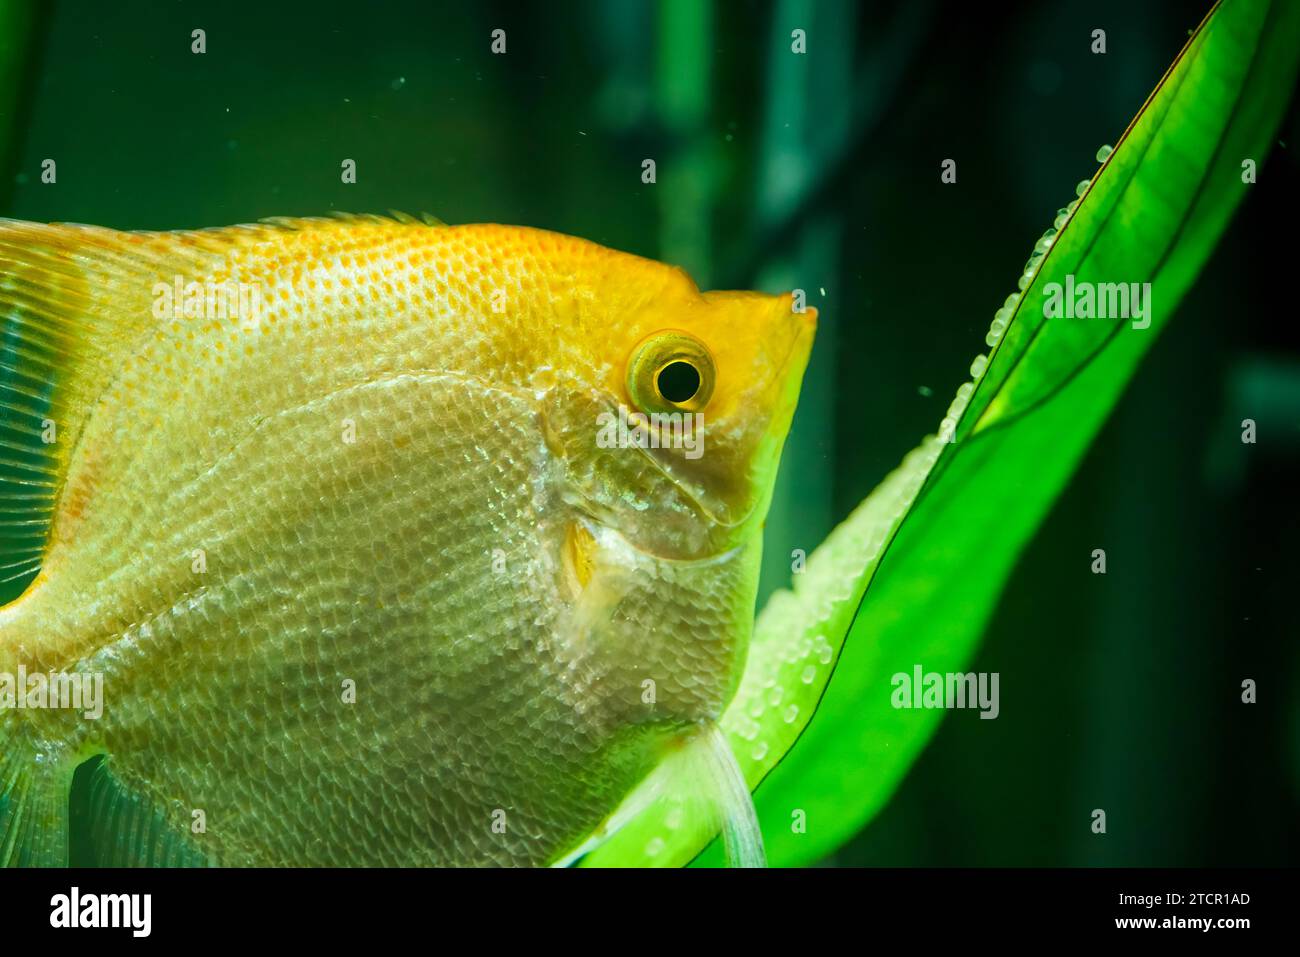 Gold Pterophyllum Scalare in aqarium water, yellow angelfish guarding eggs. Roe on the leaf Stock Photo